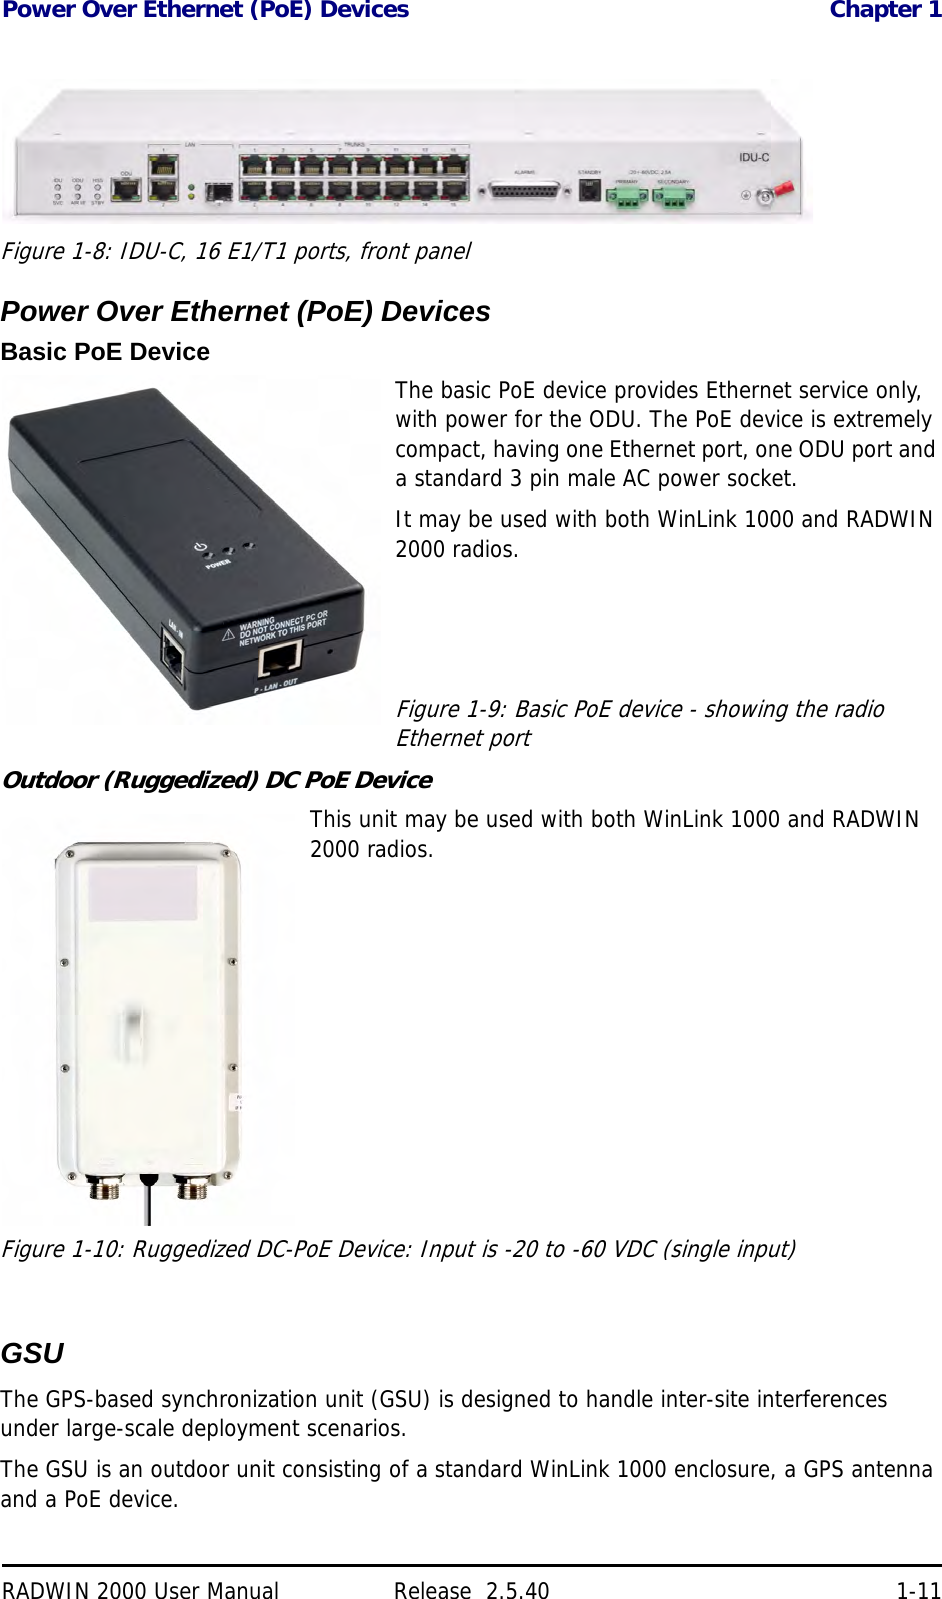 Power Over Ethernet (PoE) Devices Chapter 1RADWIN 2000 User Manual Release  2.5.40 1-11Figure 1-8: IDU-C, 16 E1/T1 ports, front panelPower Over Ethernet (PoE) DevicesBasic PoE DeviceThe basic PoE device provides Ethernet service only, with power for the ODU. The PoE device is extremely compact, having one Ethernet port, one ODU port and a standard 3 pin male AC power socket.It may be used with both WinLink 1000 and RADWIN 2000 radios.Figure 1-9: Basic PoE device - showing the radio Ethernet portOutdoor (Ruggedized) DC PoE DeviceThis unit may be used with both WinLink 1000 and RADWIN 2000 radios.Figure 1-10: Ruggedized DC-PoE Device: Input is -20 to -60 VDC (single input)  GSUThe GPS-based synchronization unit (GSU) is designed to handle inter-site interferences under large-scale deployment scenarios.The GSU is an outdoor unit consisting of a standard WinLink 1000 enclosure, a GPS antenna and a PoE device.